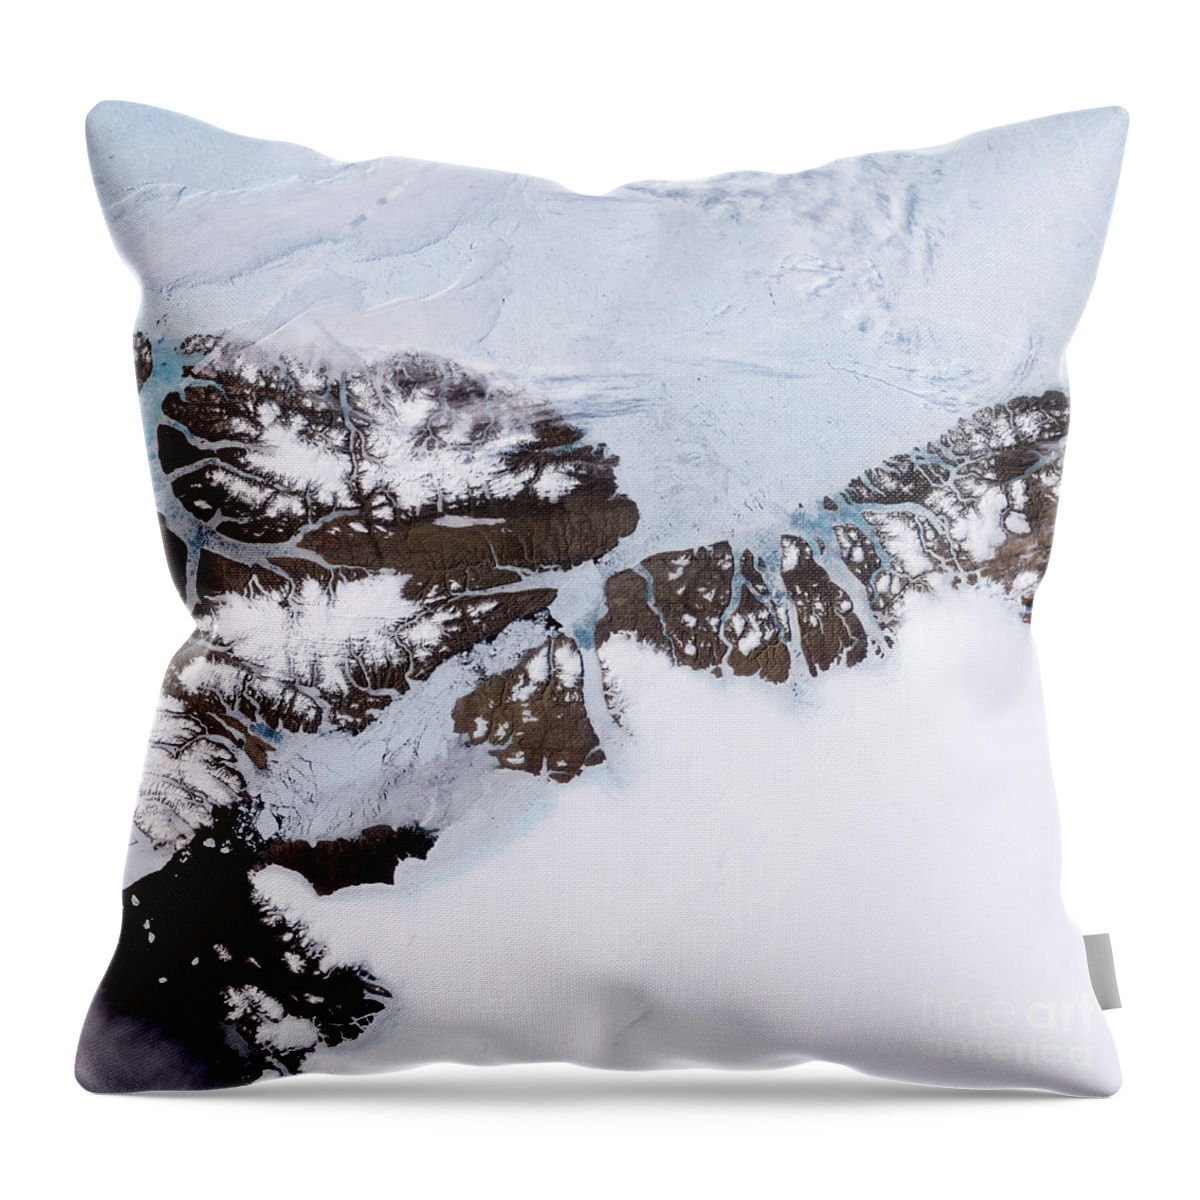 Petermann Glacier Throw Pillow featuring the photograph Petermann Glacier, Greenland by Nasa